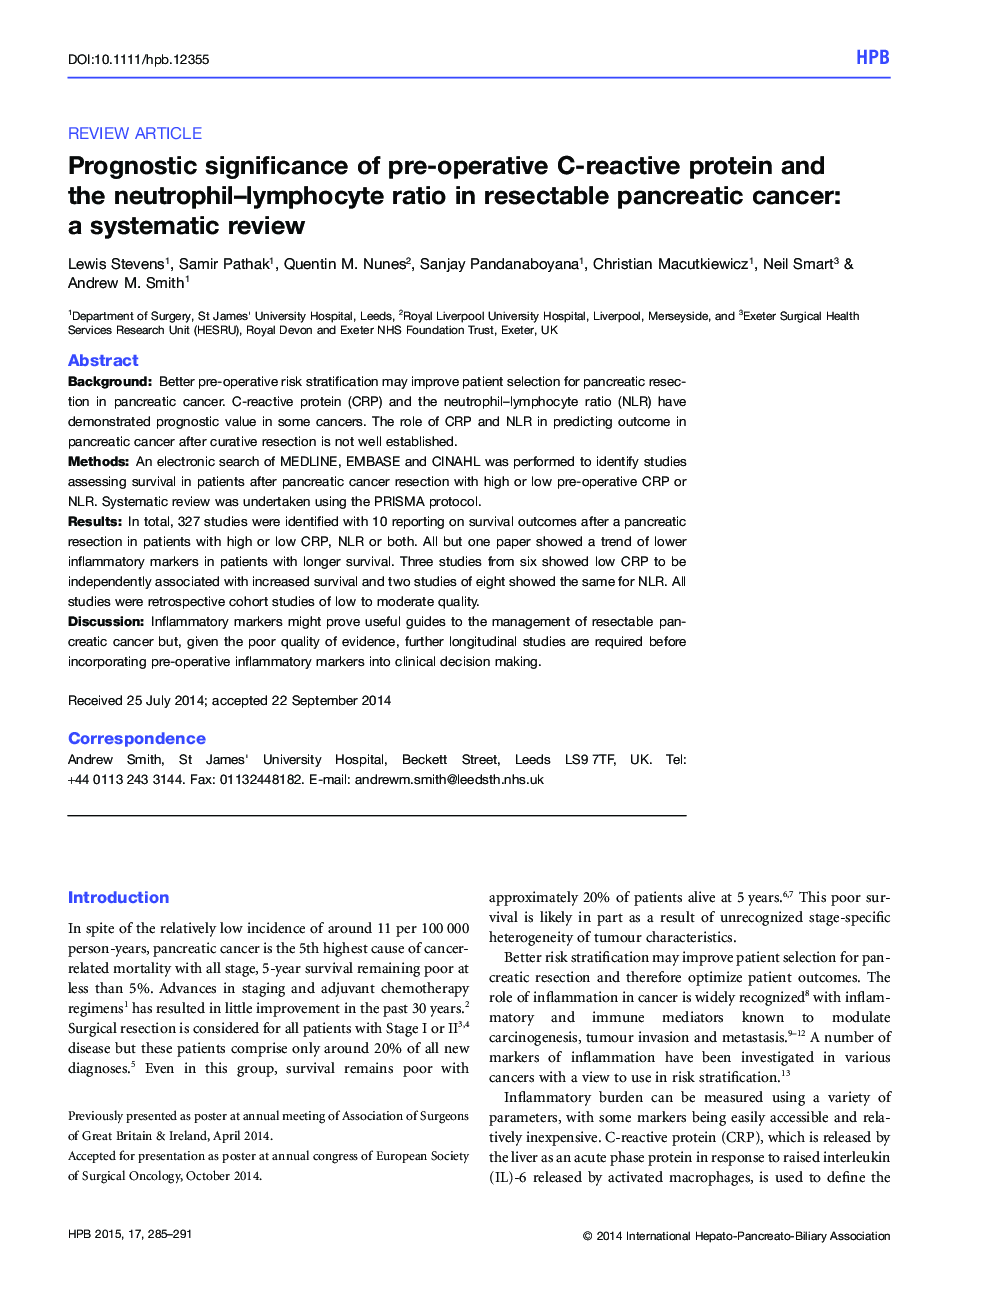 Prognostic significance of pre-operative C-reactive protein and the neutrophil–lymphocyte ratio in resectable pancreatic cancer: a systematic review 